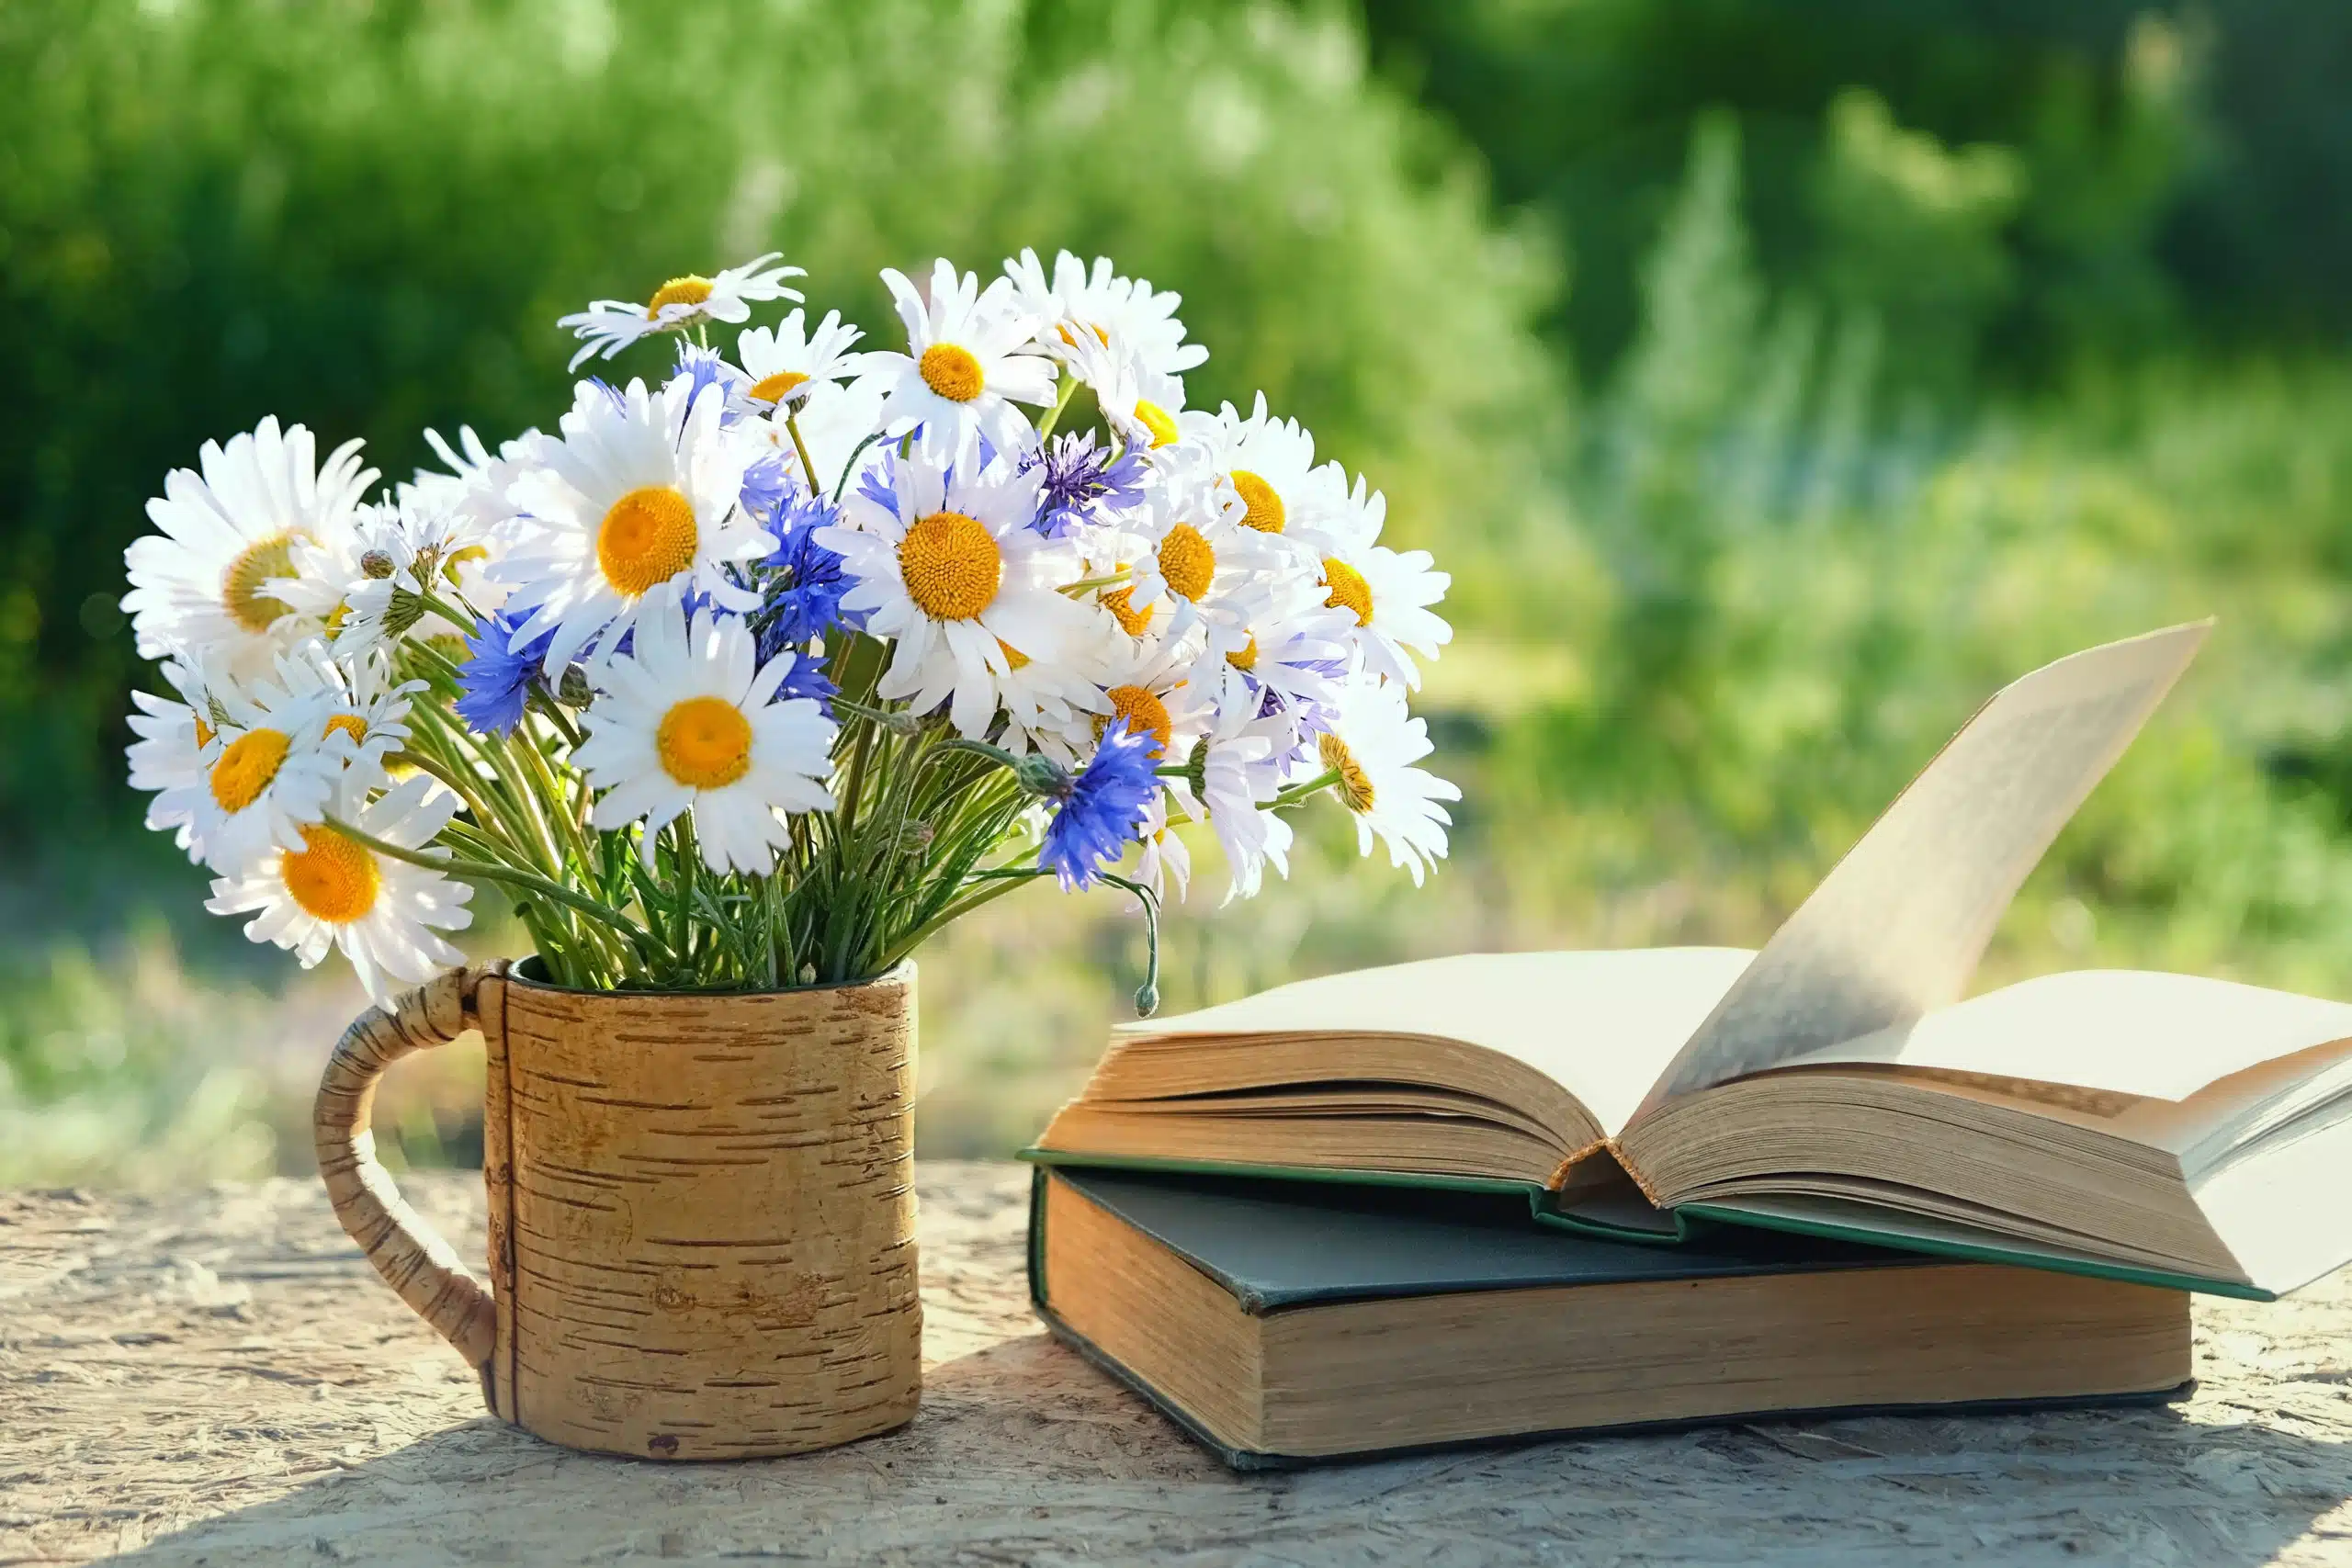 Flowers bouqet in rustic cup and old books on table in the garden.